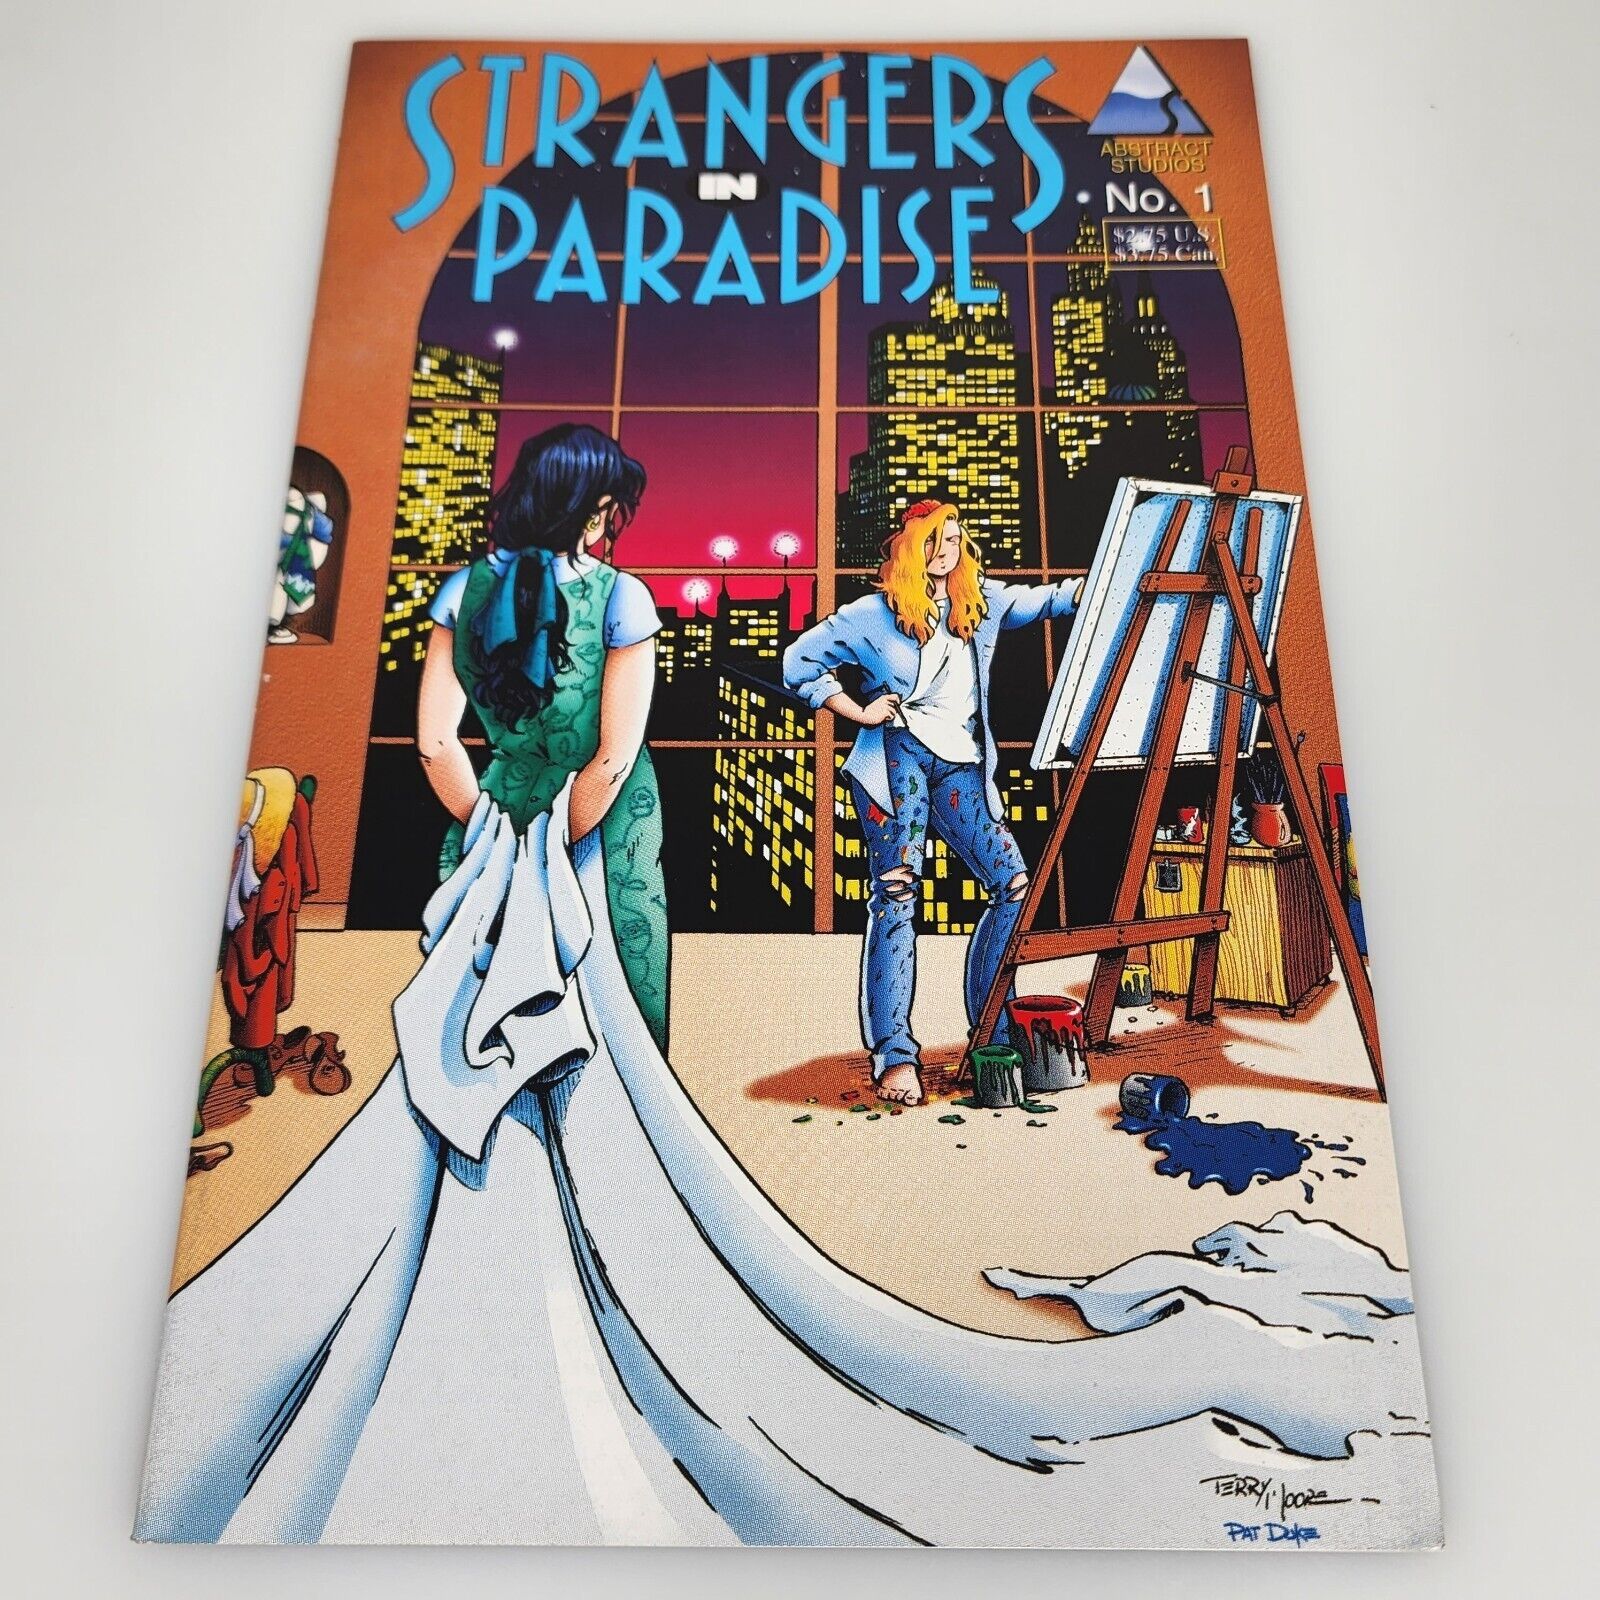 STRANGERS IN PARADISE #1 ABSTRACT 1994 Terry Moore 1st Print